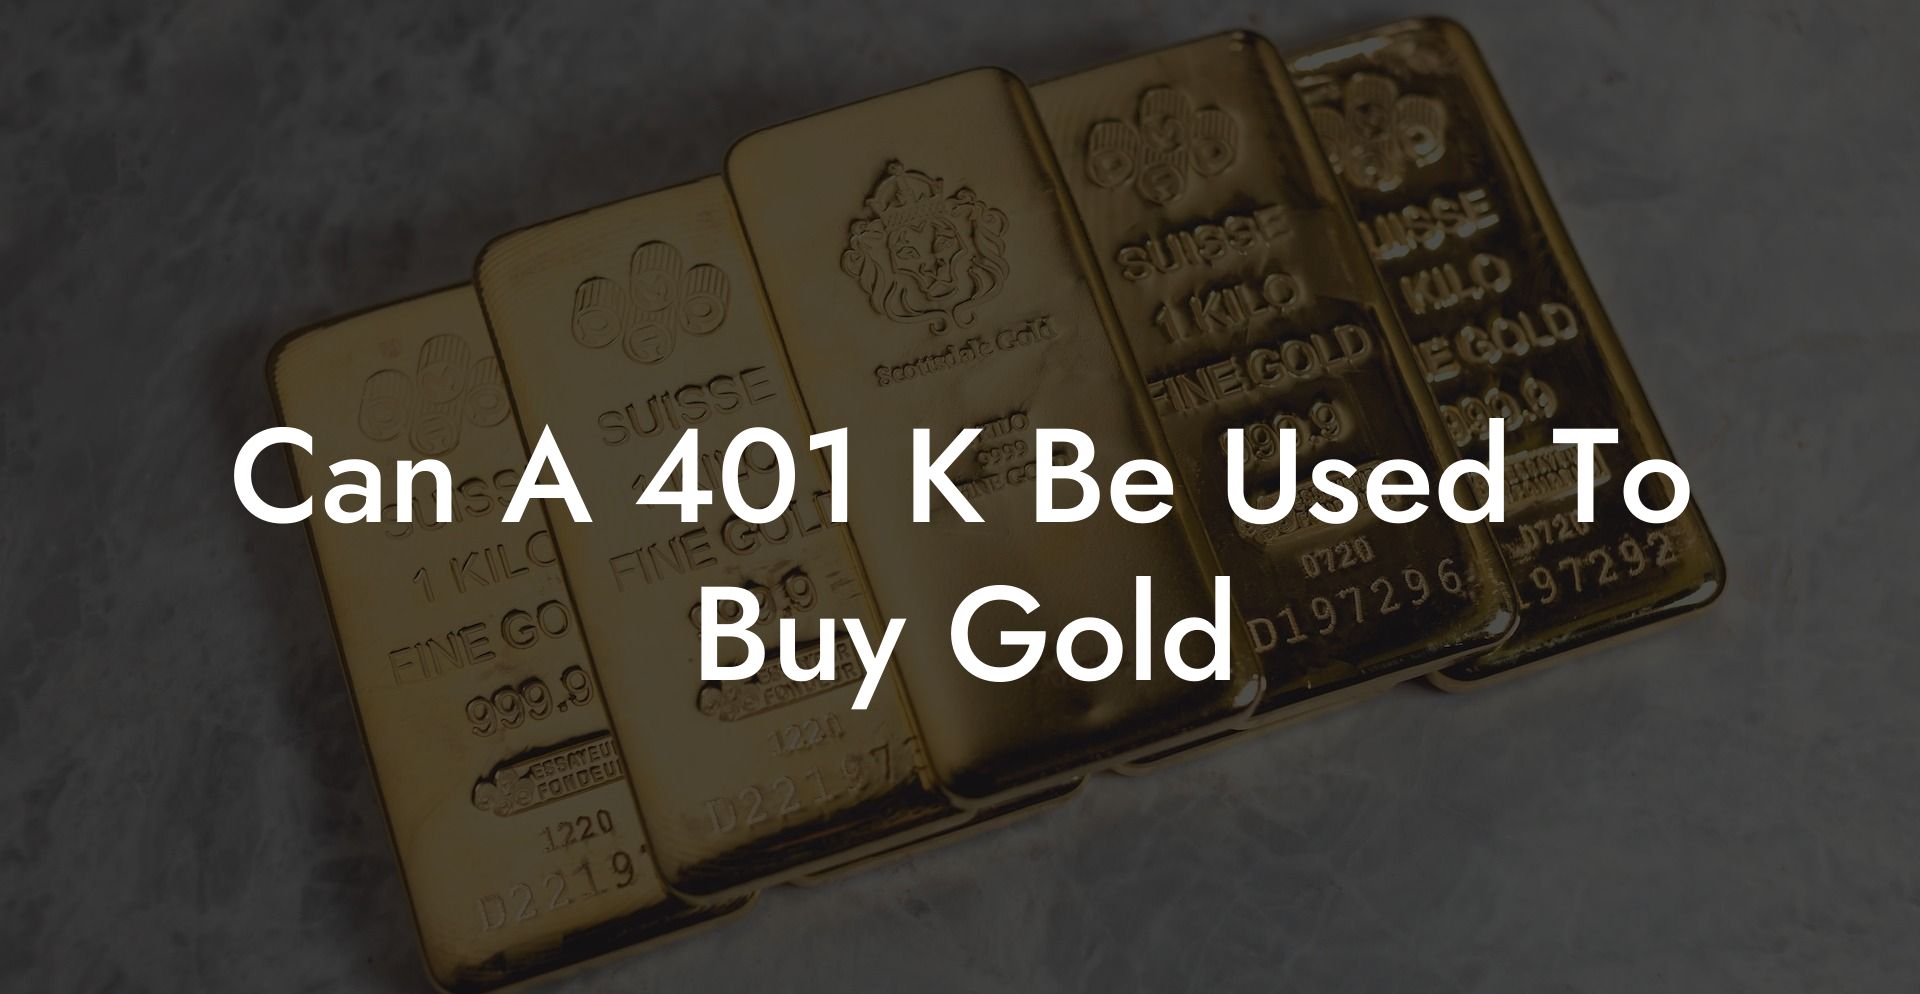 Can A 401 K Be Used To Buy Gold